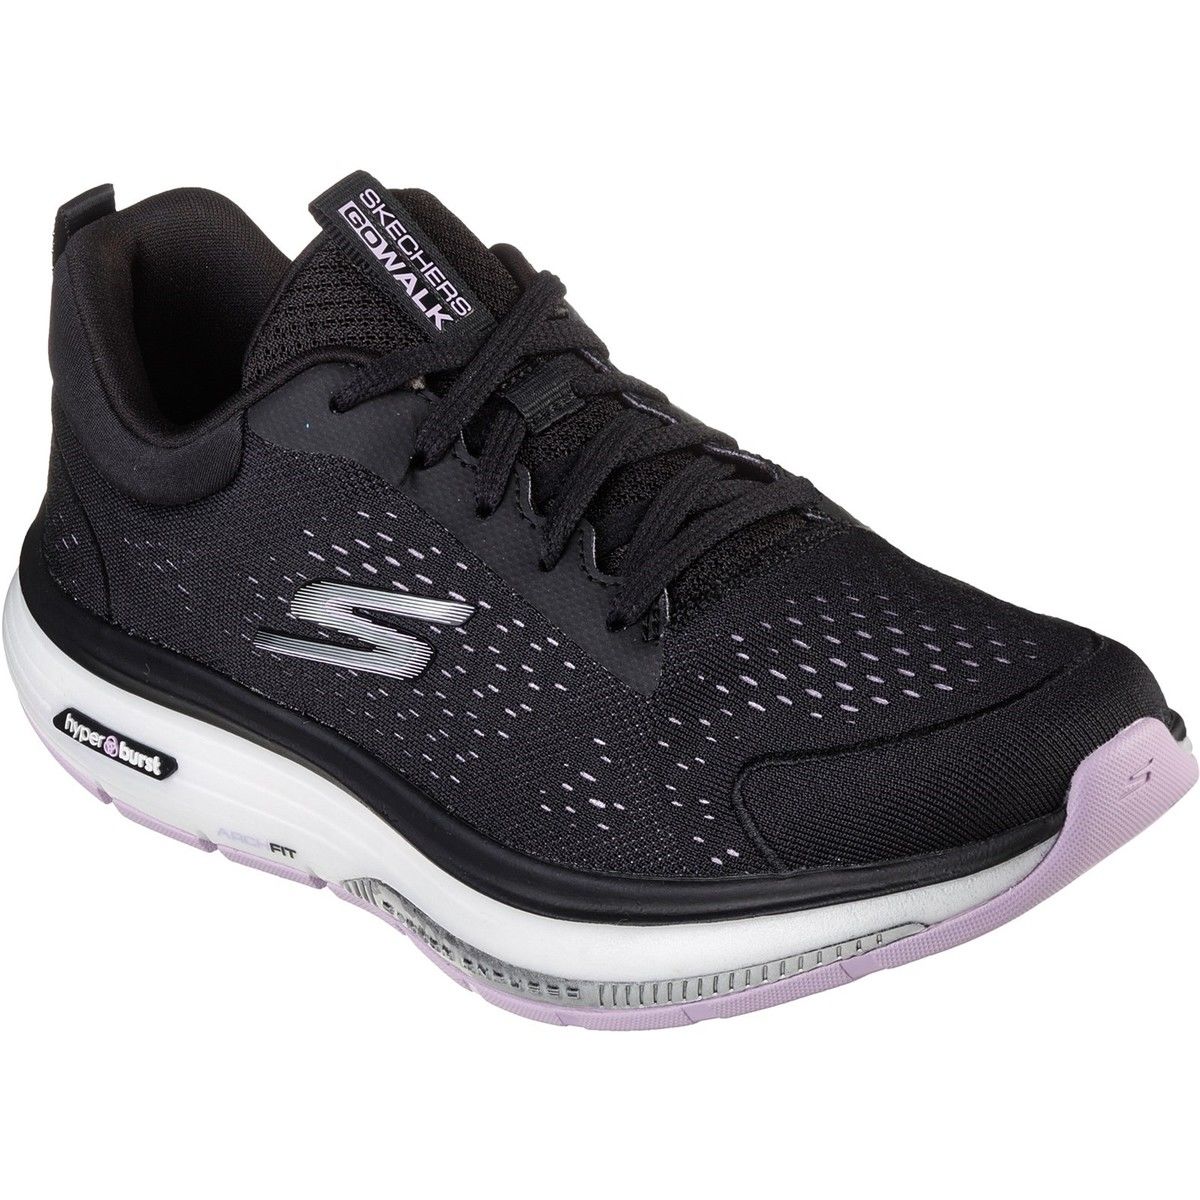 Skechers Go Walk Arch Fit Workout Walker BKLV Black Womens trainers in a Plain Textile in Size 5